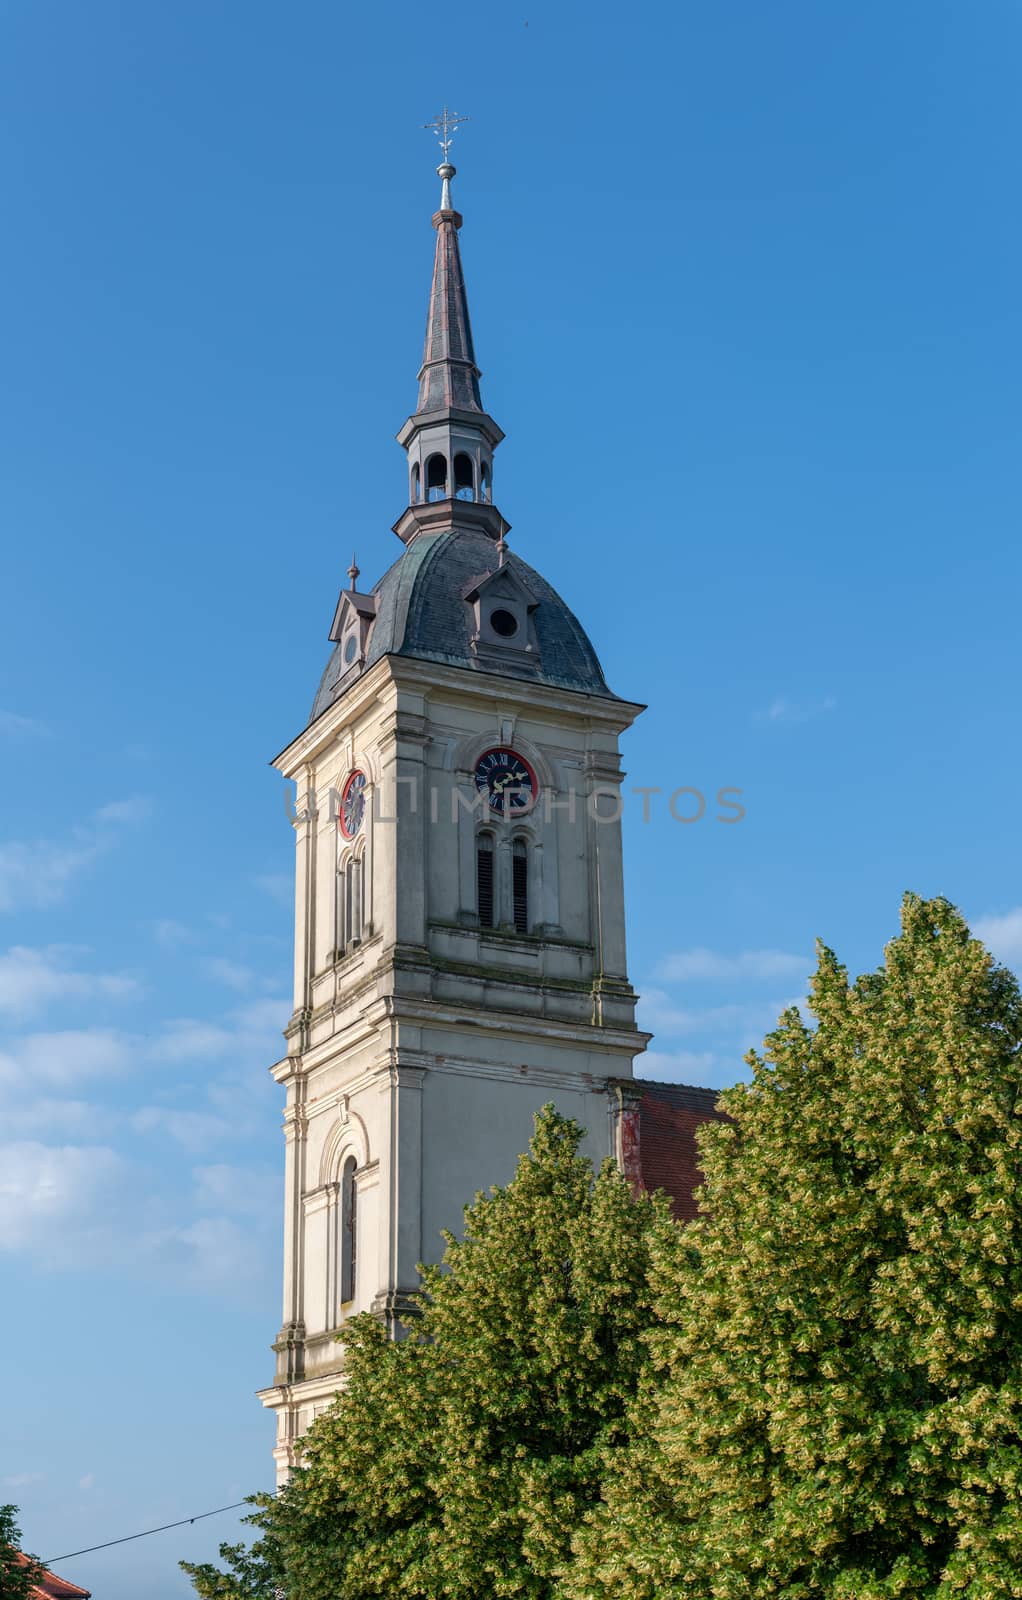 Church tower with clock by asafaric